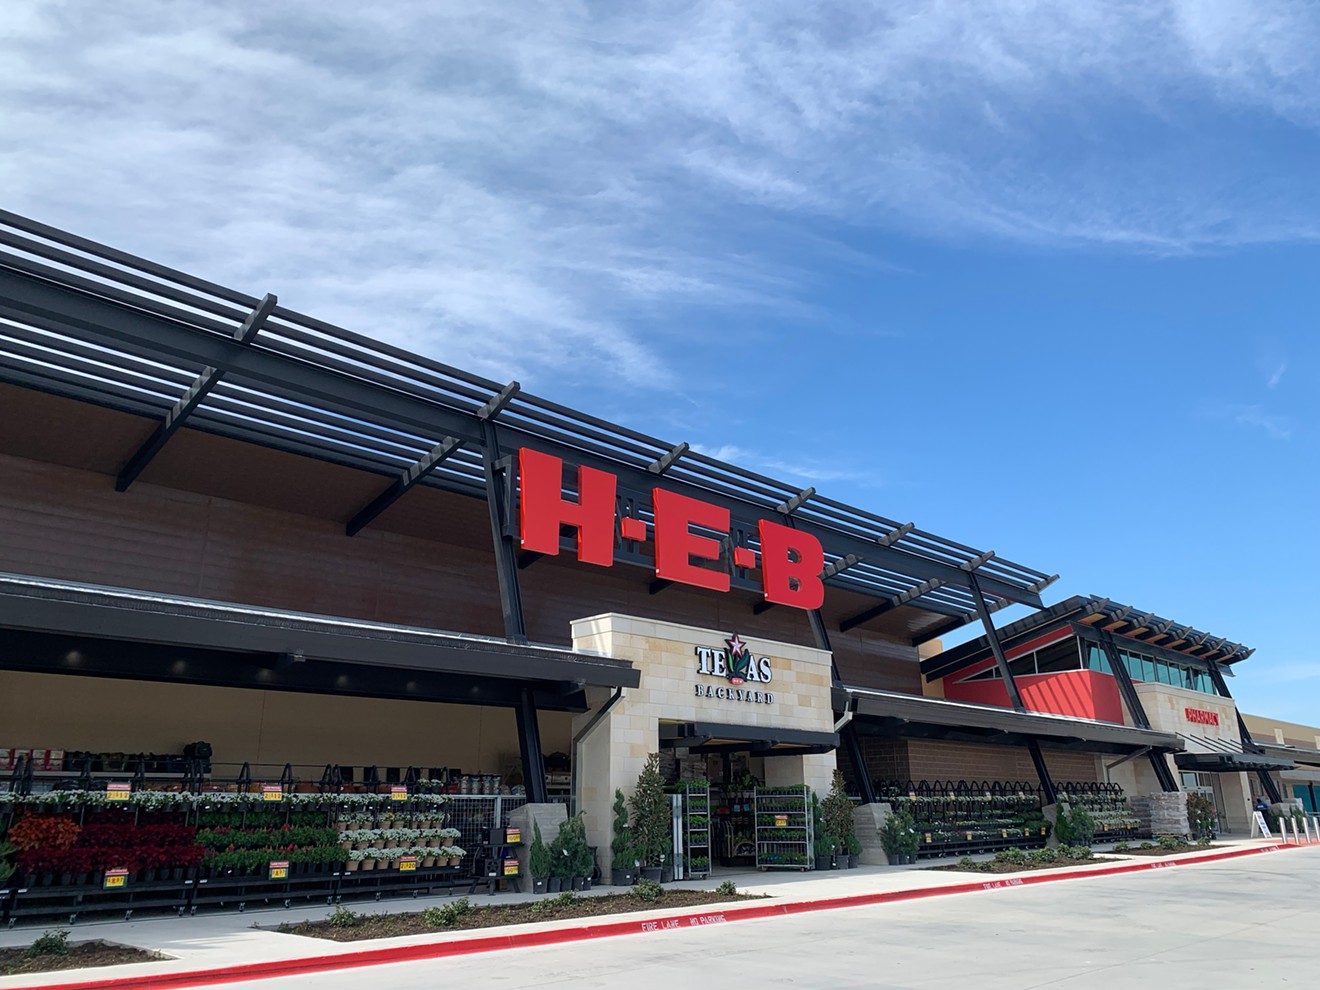 If you make a Texas food product, you may want to look into H-E-B's Quest for Texas Best.